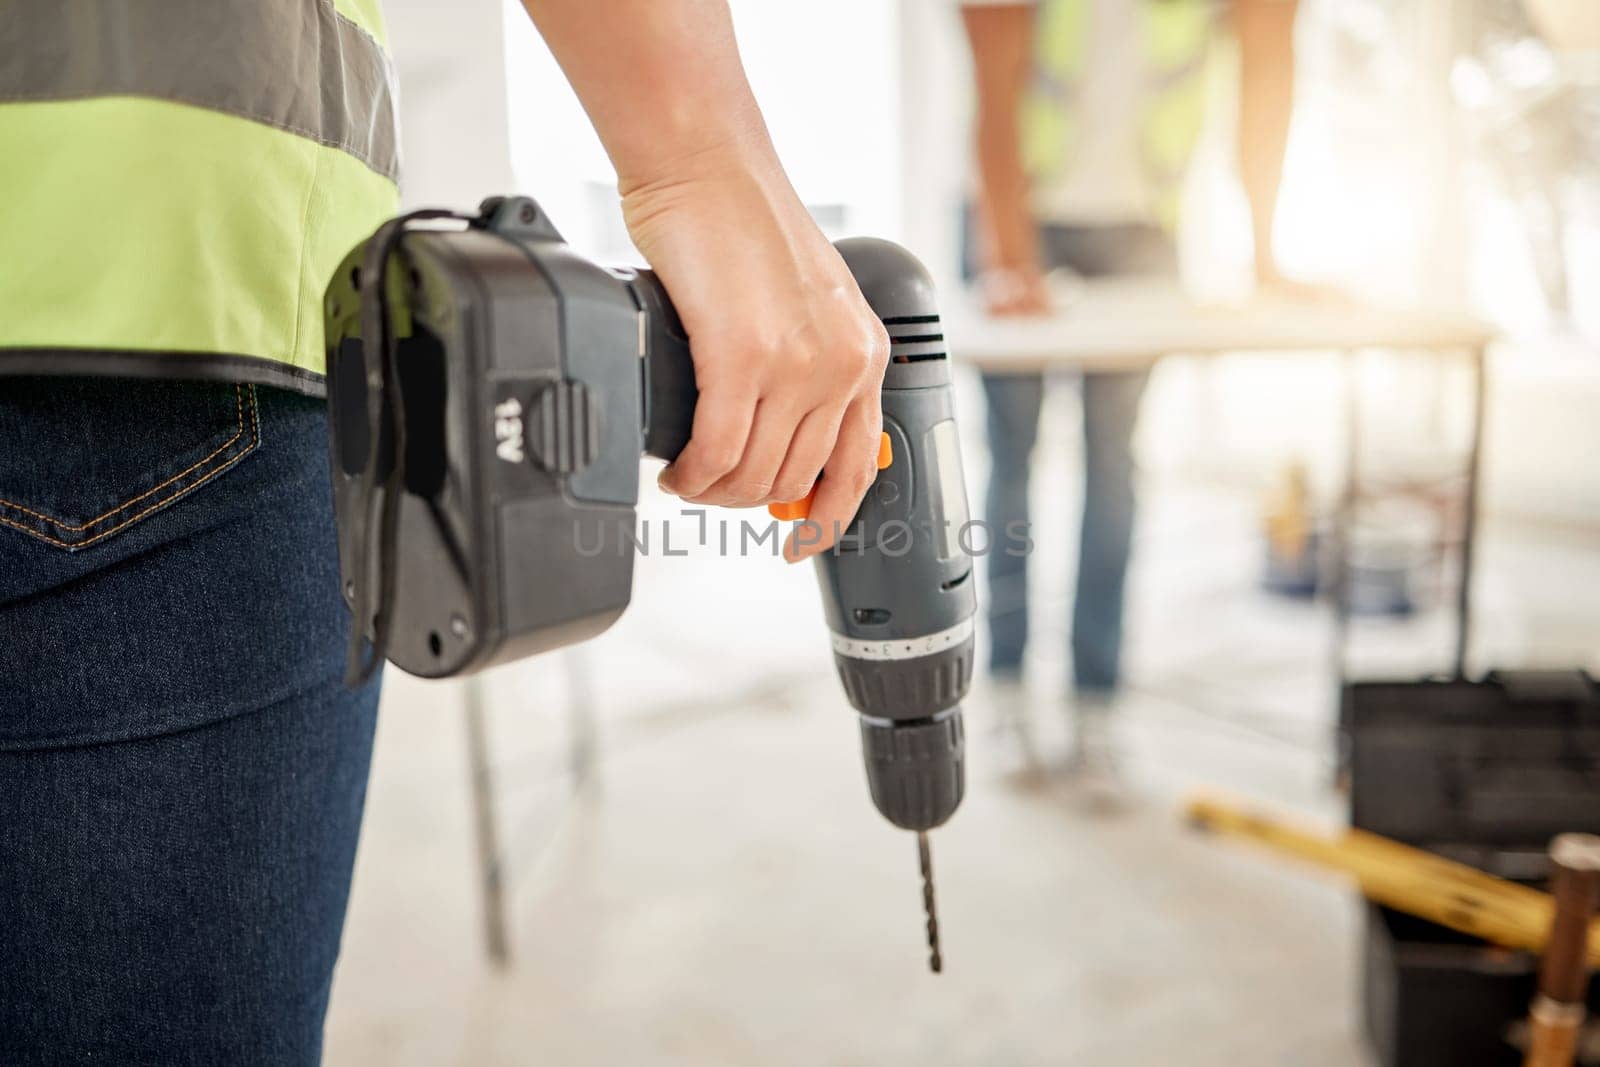 Drill, construction and hand of handyman for home renovation, maintenance or carpenter work. Back of engineer, constructor or contractor person with electric power tools in room or building site.